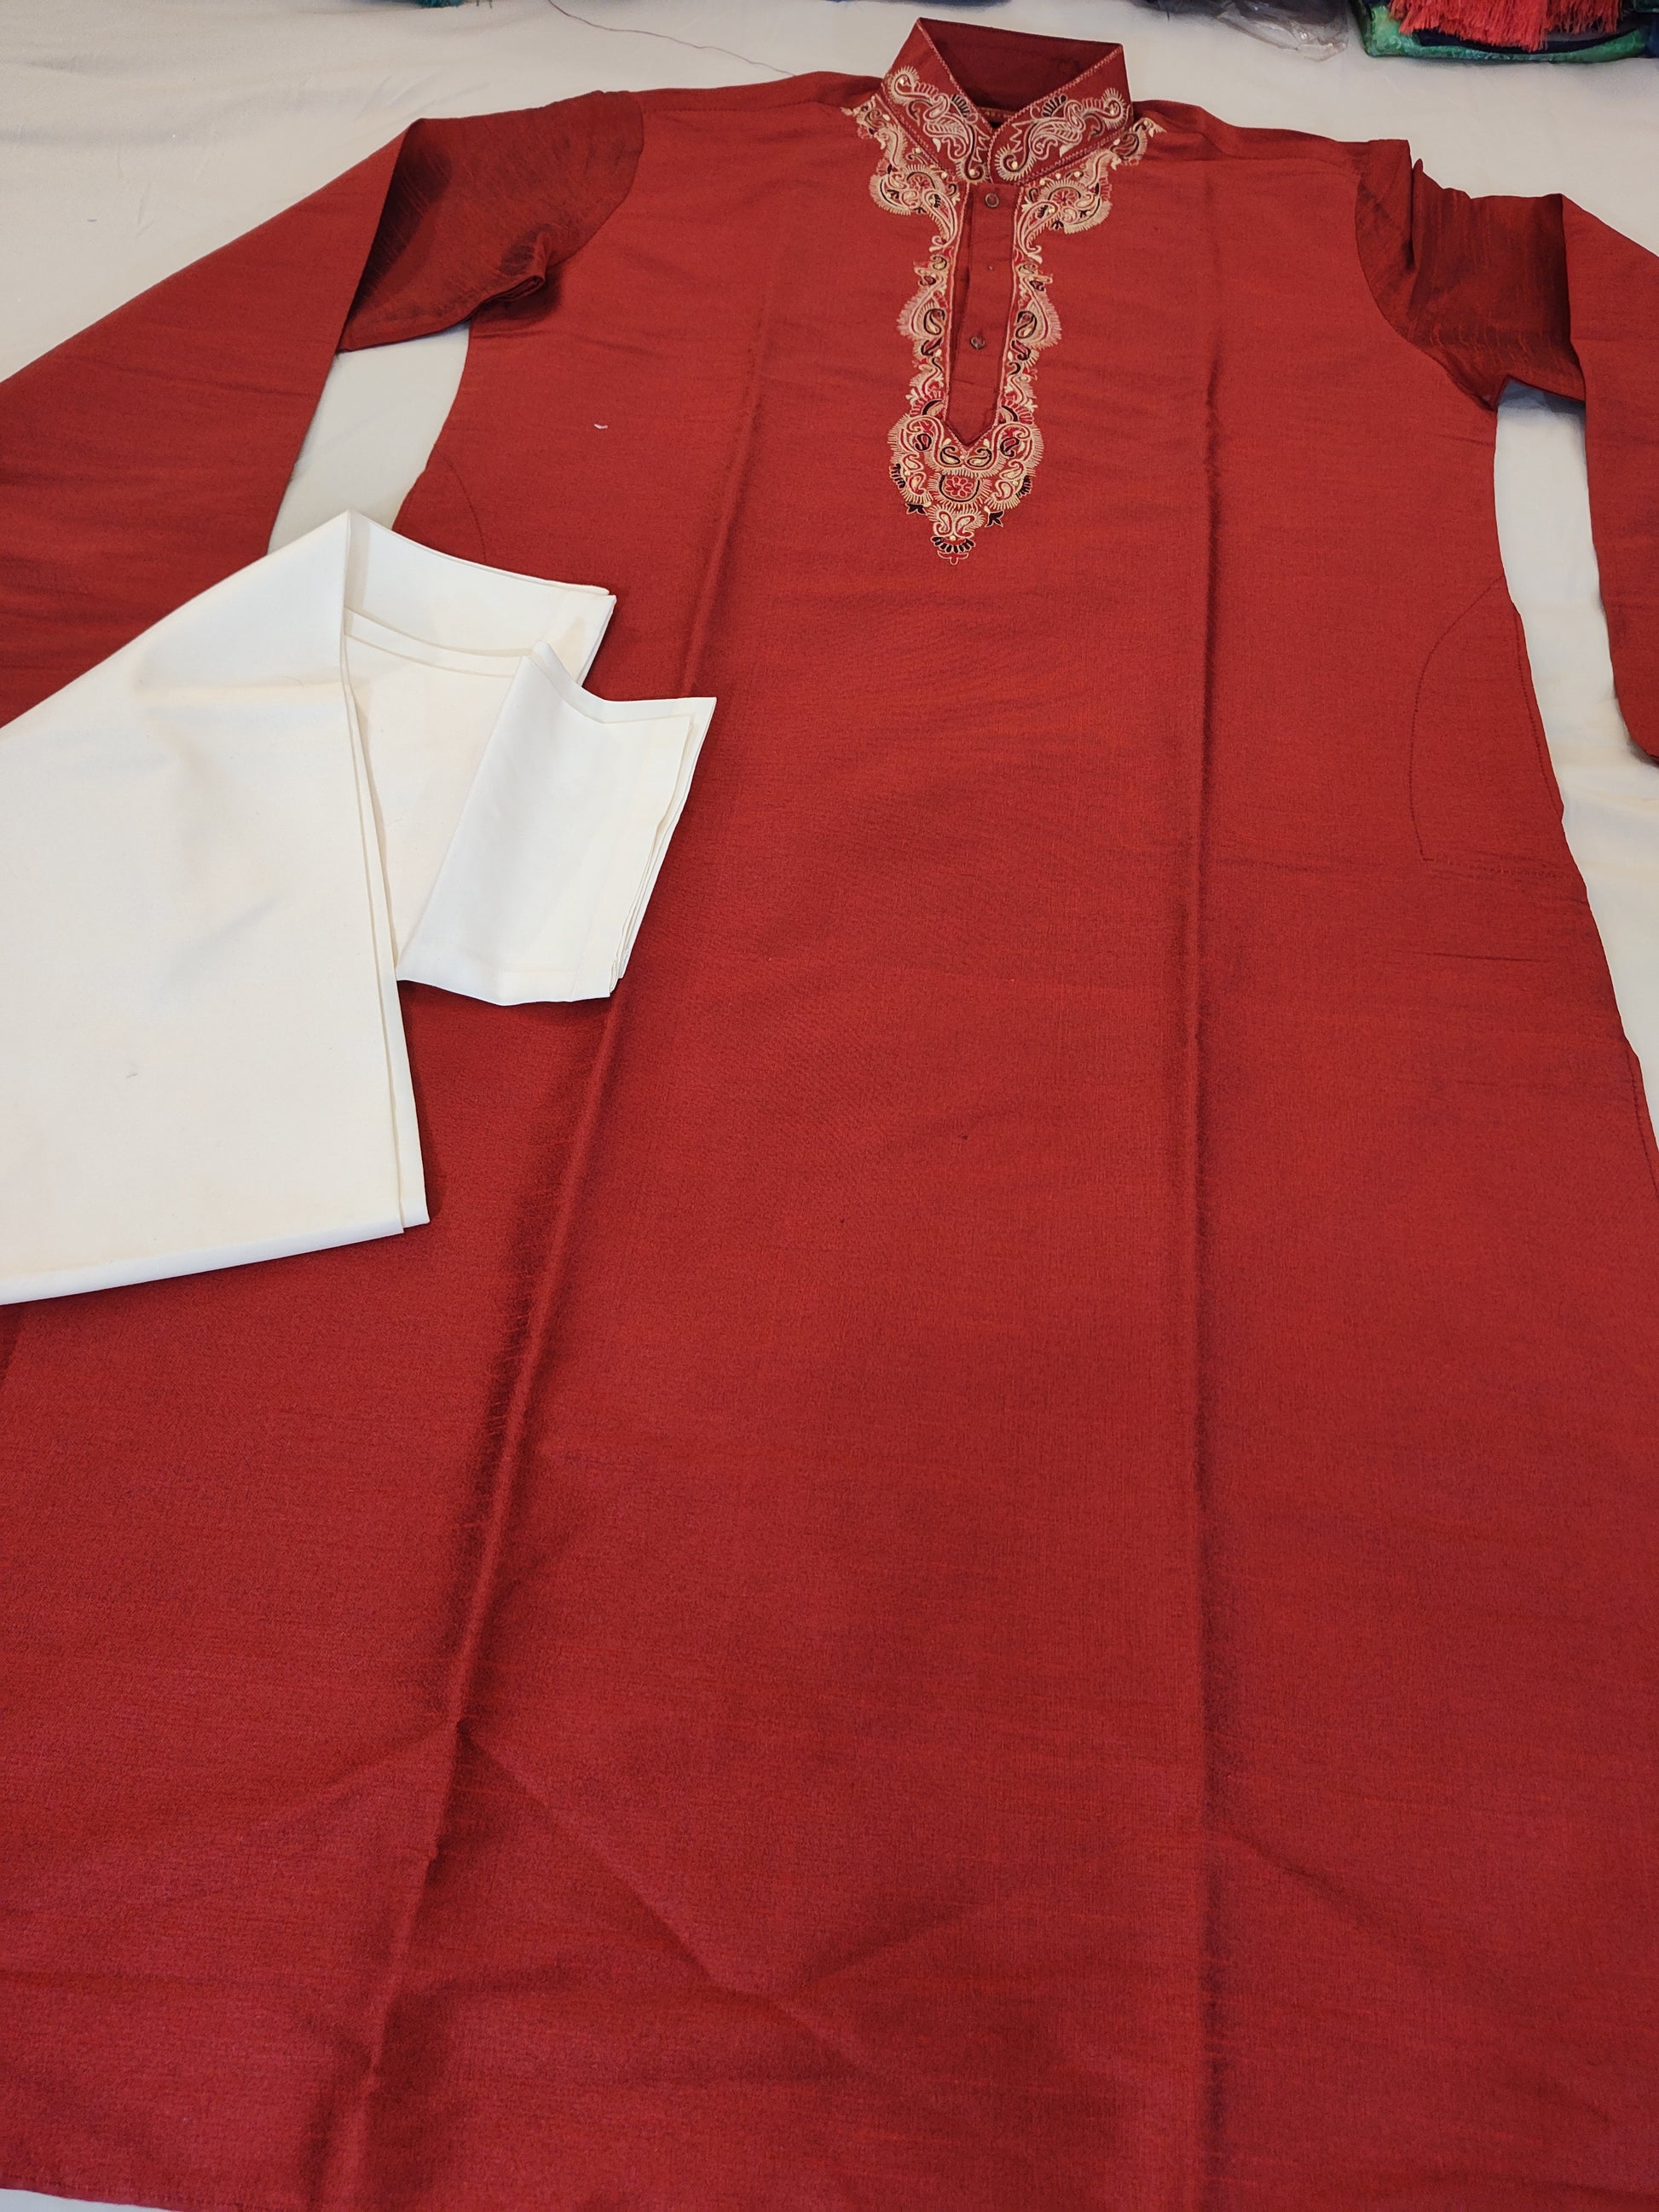 Pleasing Red Color Men's Cotton Kurta With Pajama Pant In Yuma